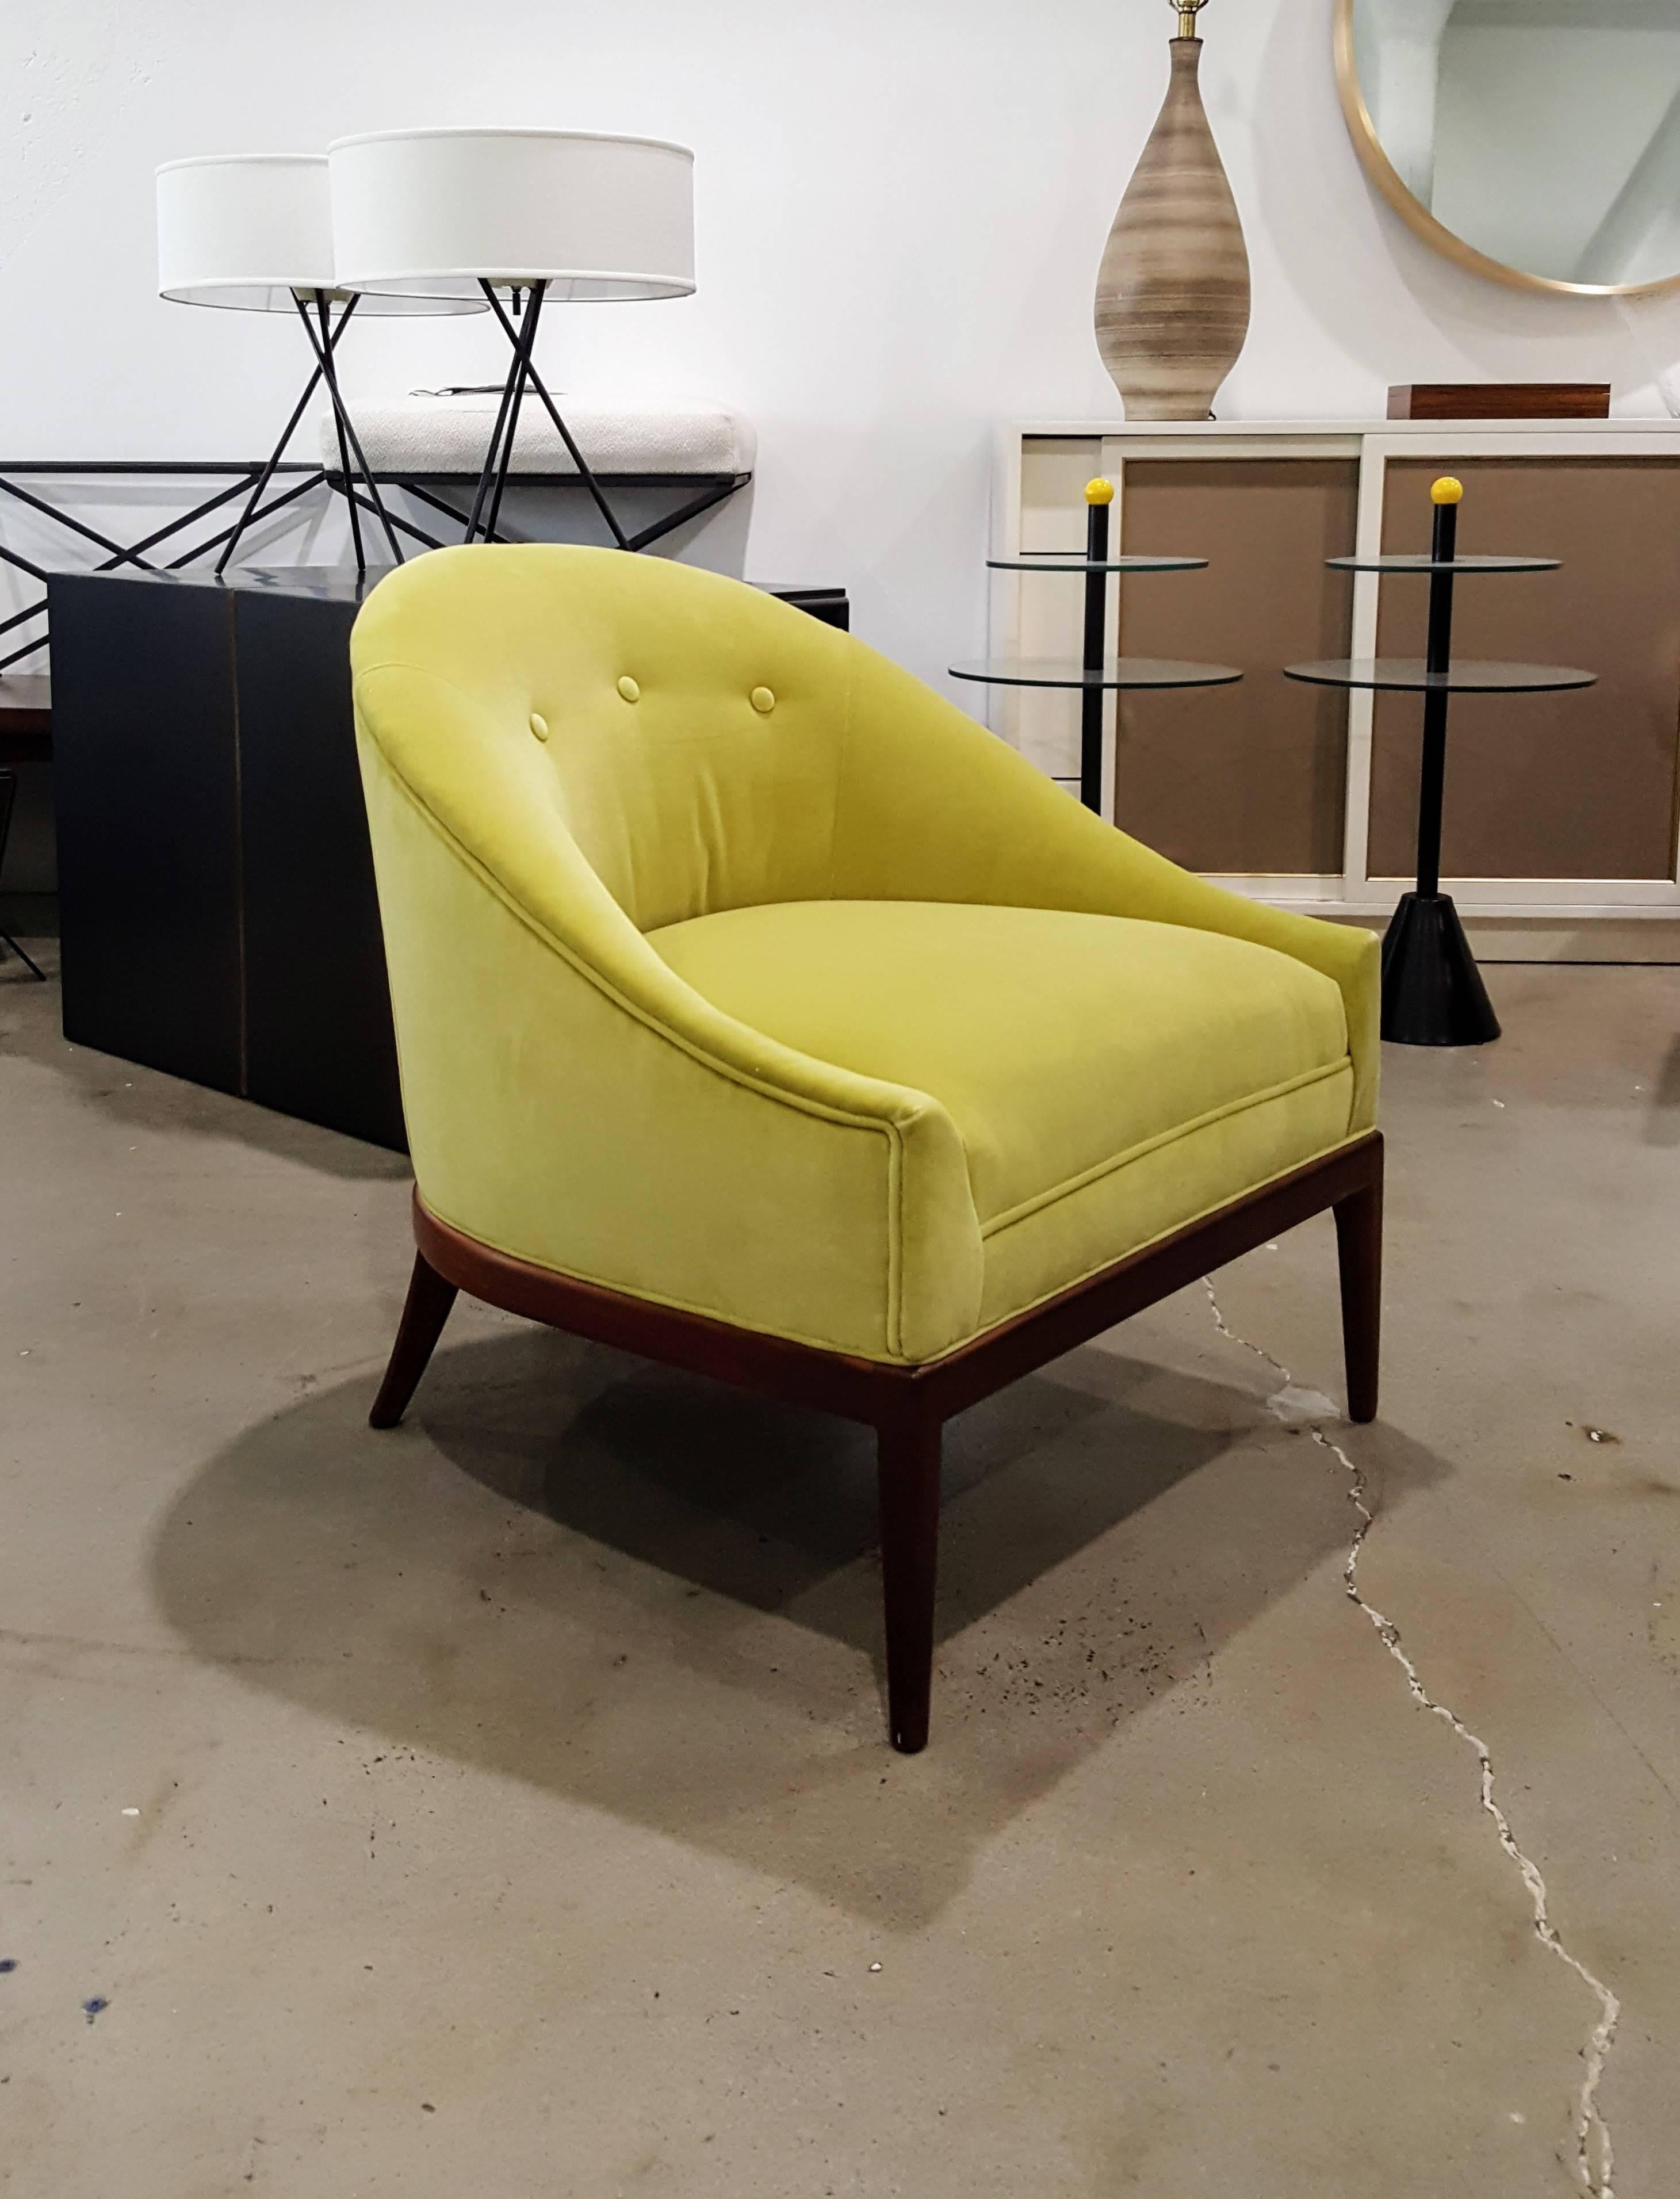 Modern slipper chairs in New Celadon green velvet, 1960s. In the style of Harvey Probber.

See this item in our private NYC showroom! Refine Limited is located in the heart of Chelsea at the history Starrett-LeHigh Building, 601 West 26th Street,